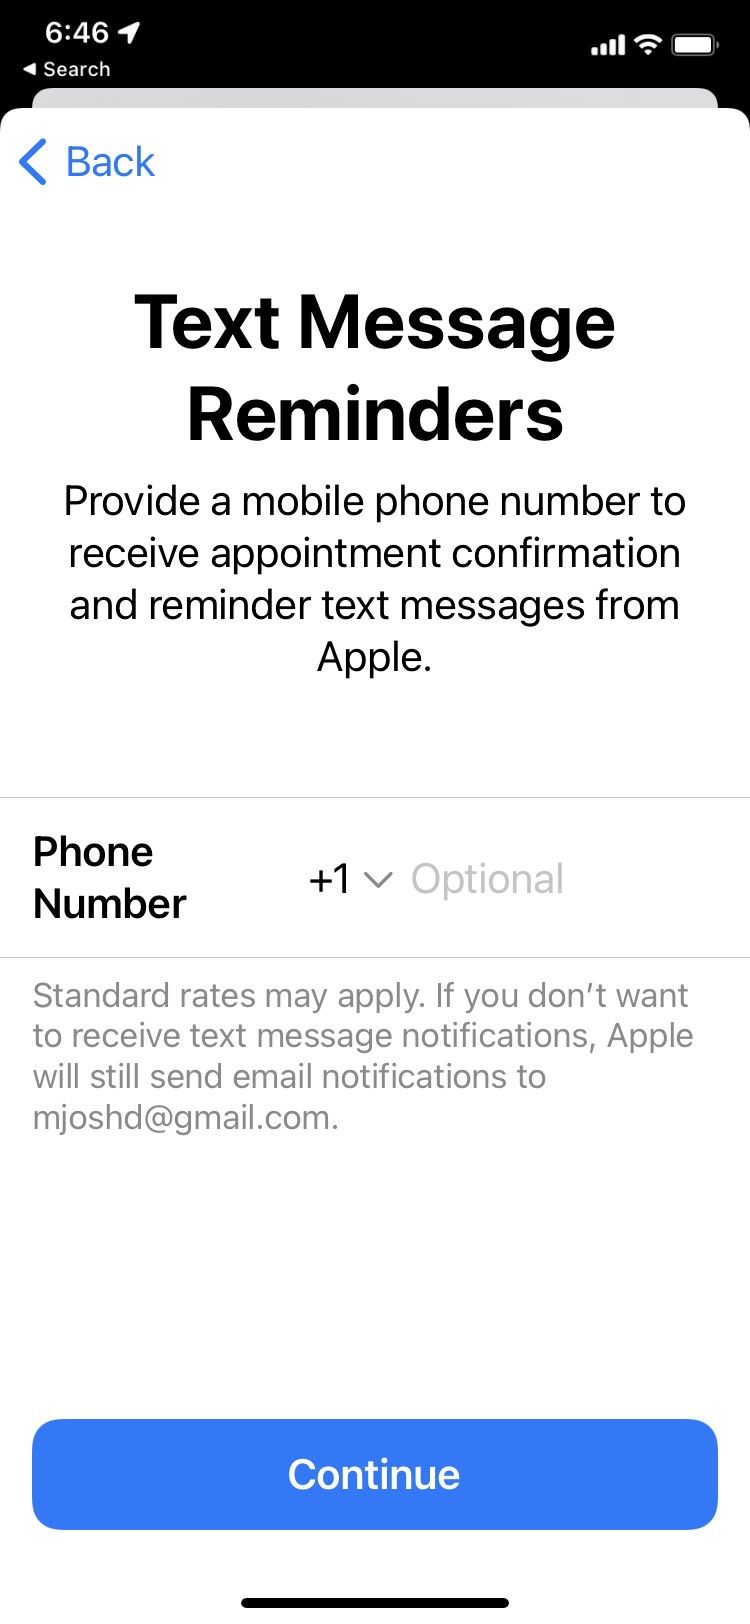 You can receive text reminders from the app about your Apple Support case